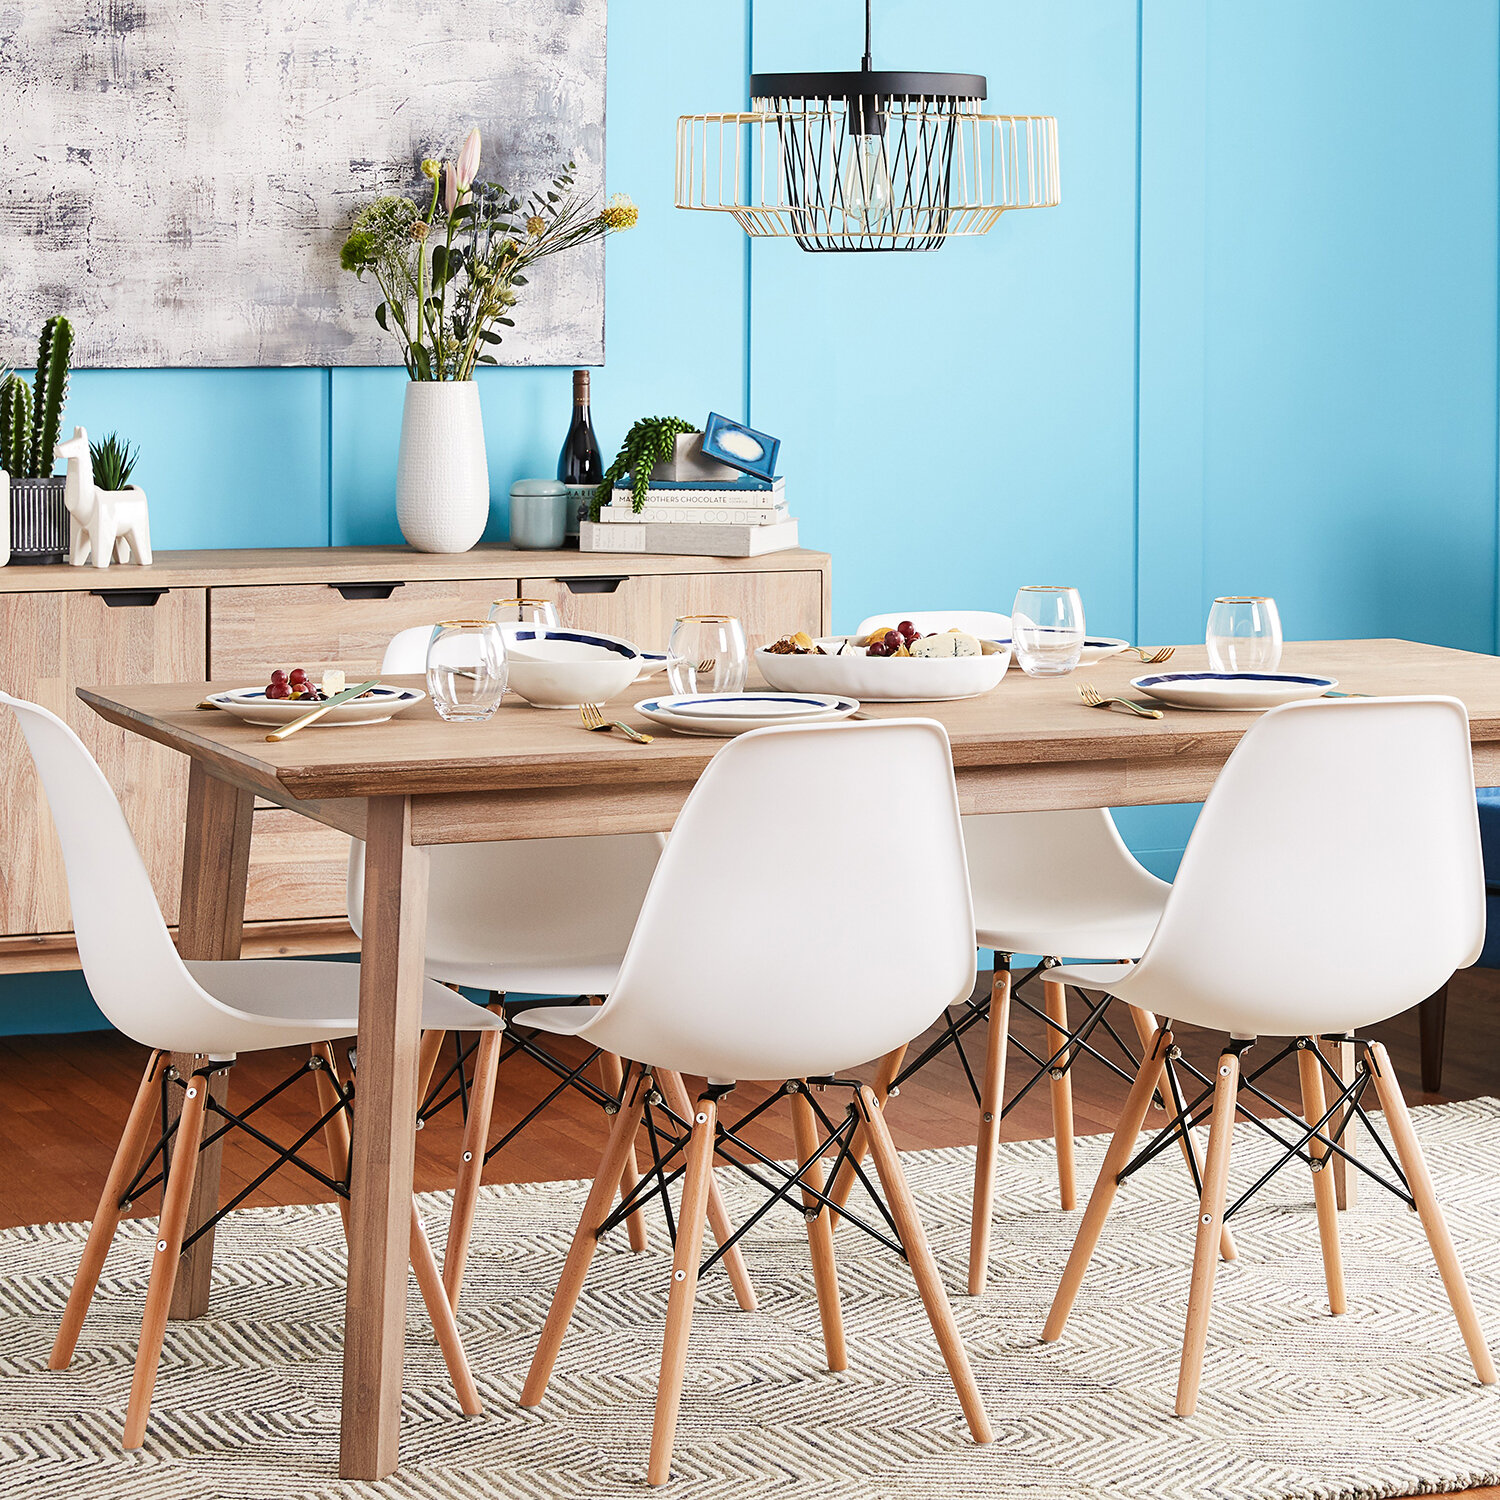 Kitchen & Dining Chairs You'll Love